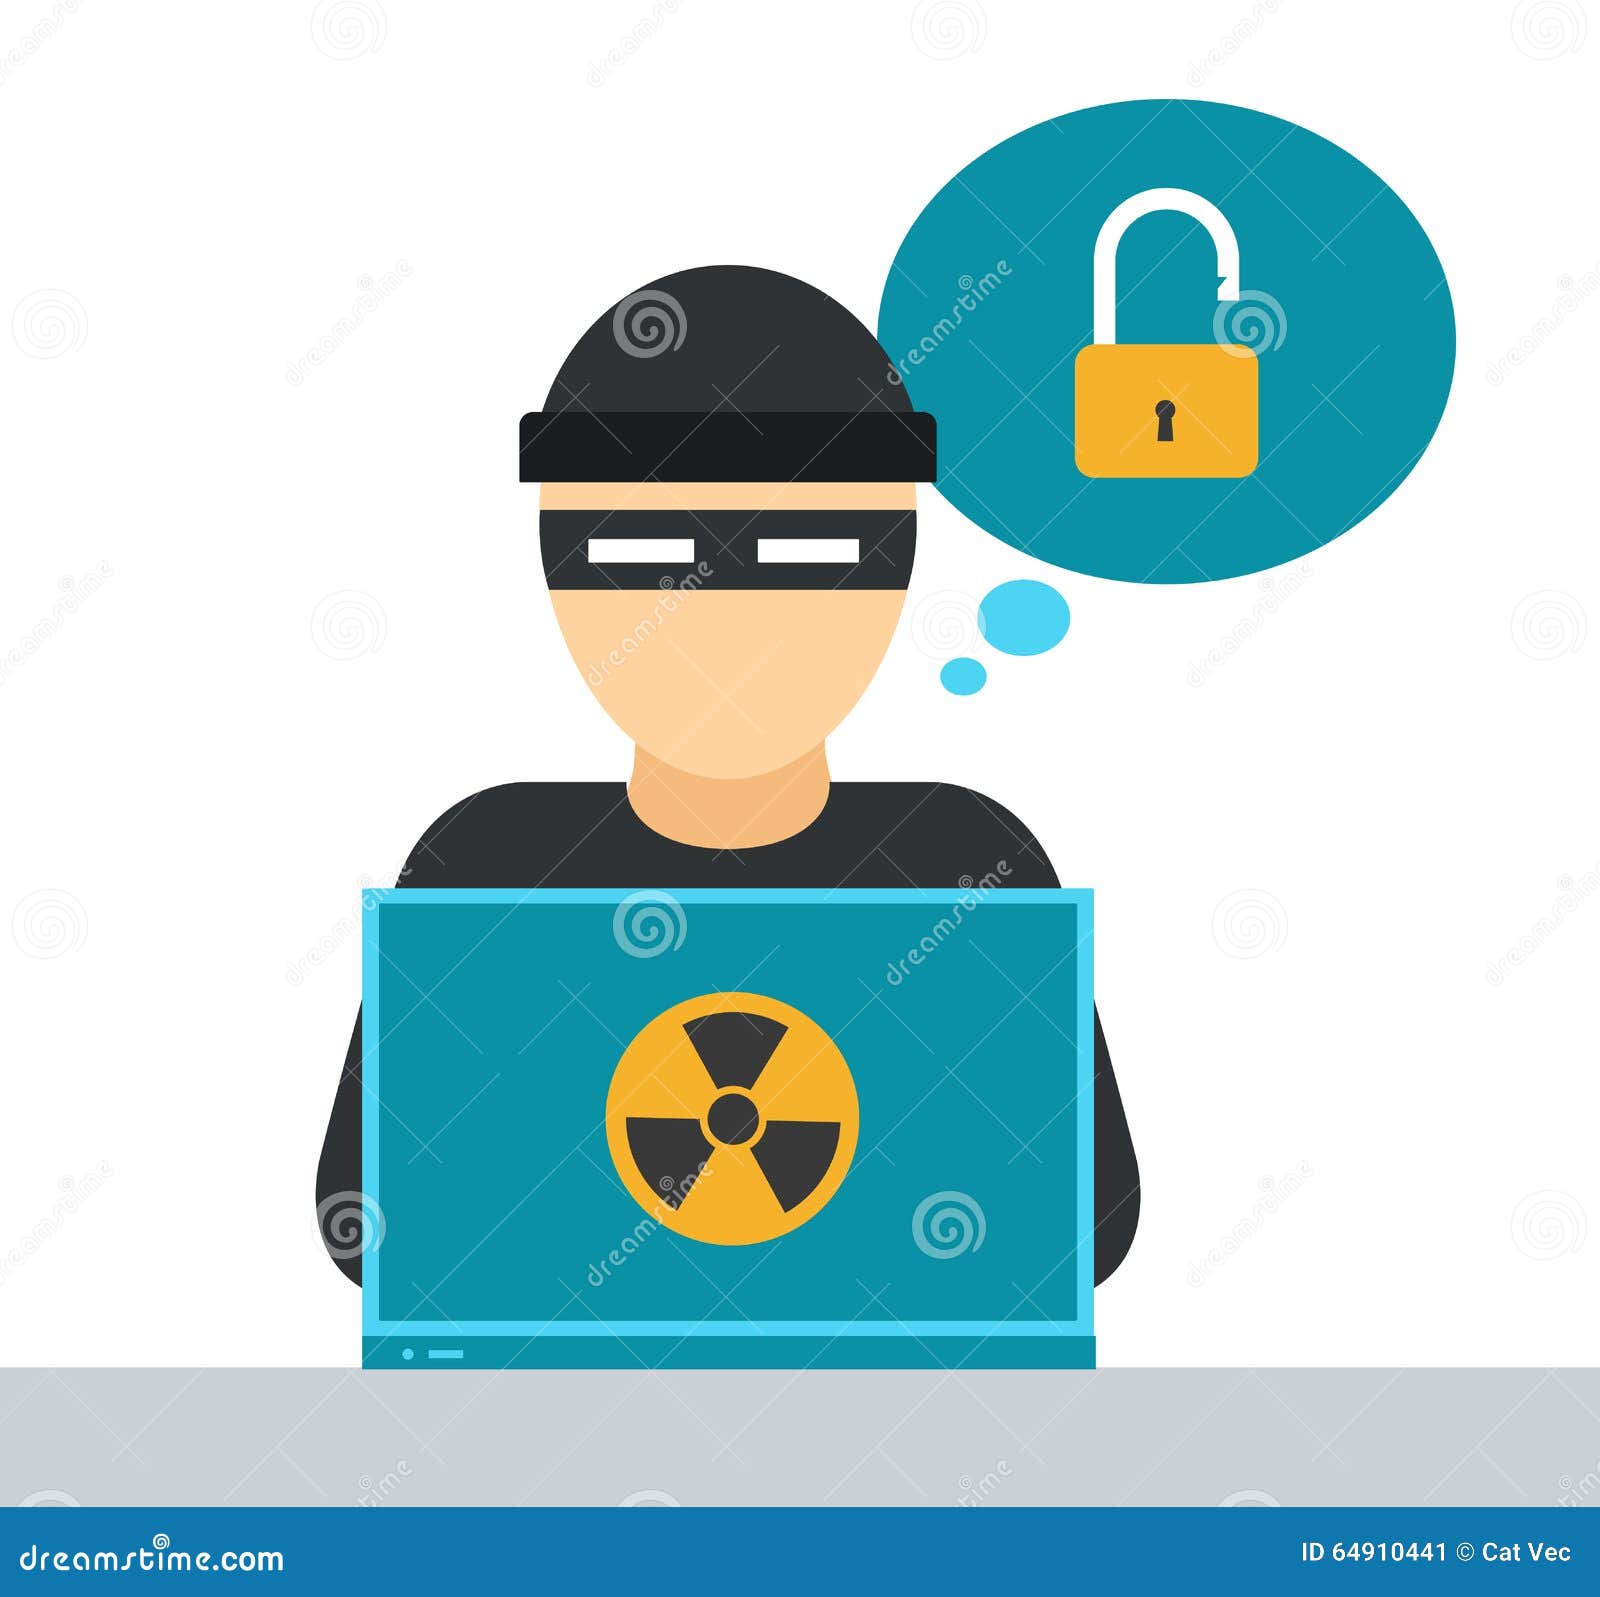 cyber security clipart free - photo #7